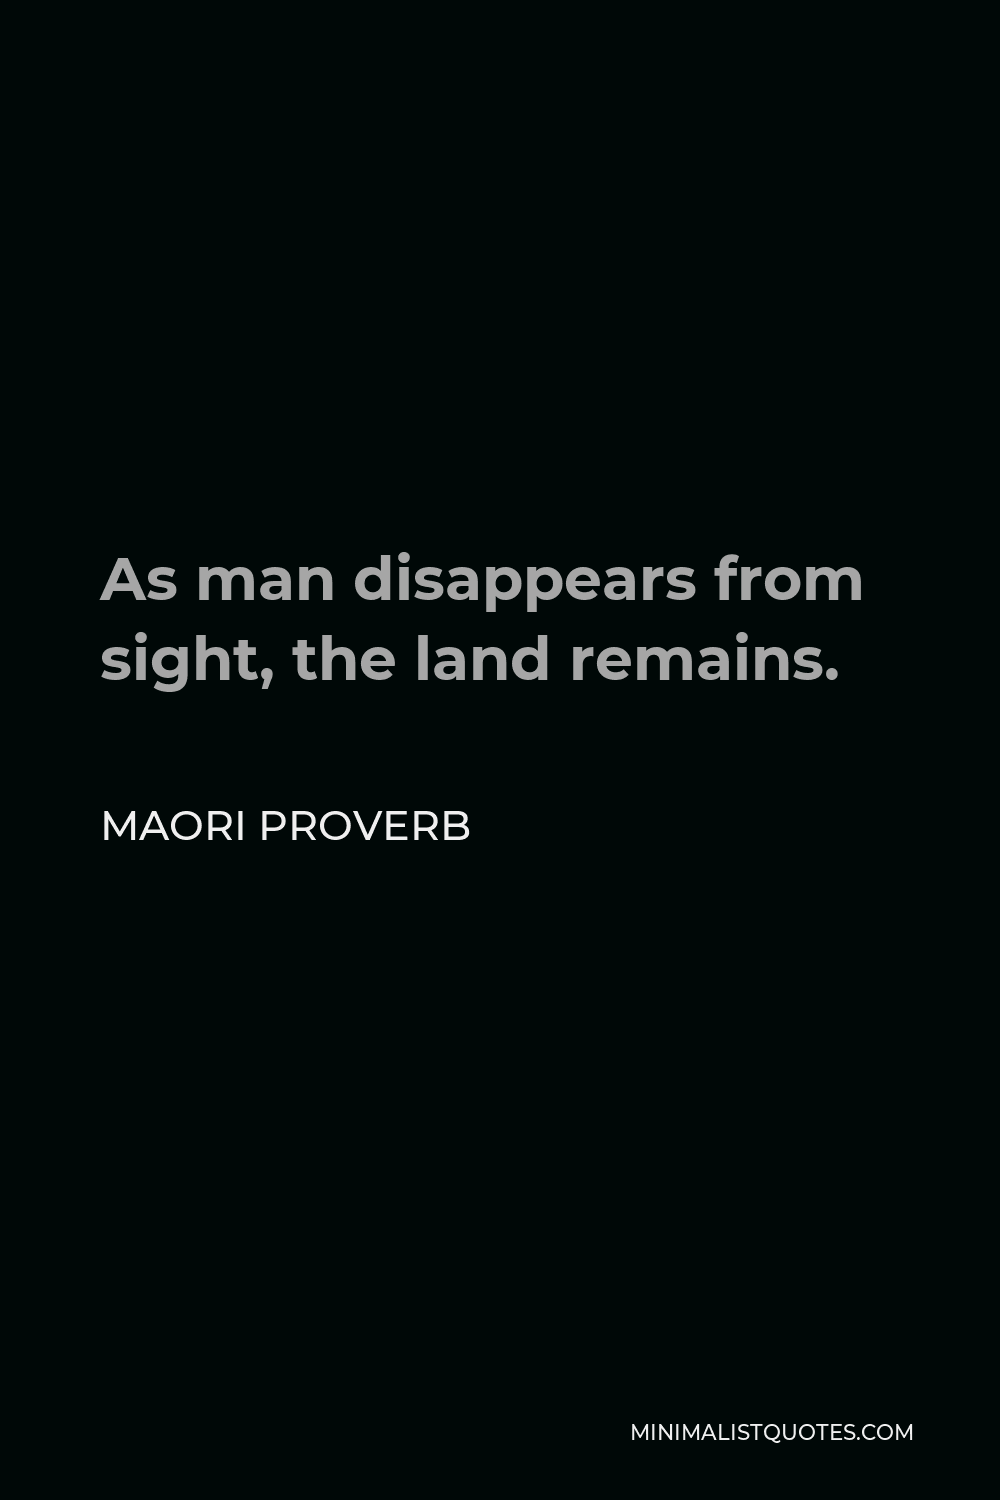 Maori Proverb Quote - As man disappears from sight, the land remains.